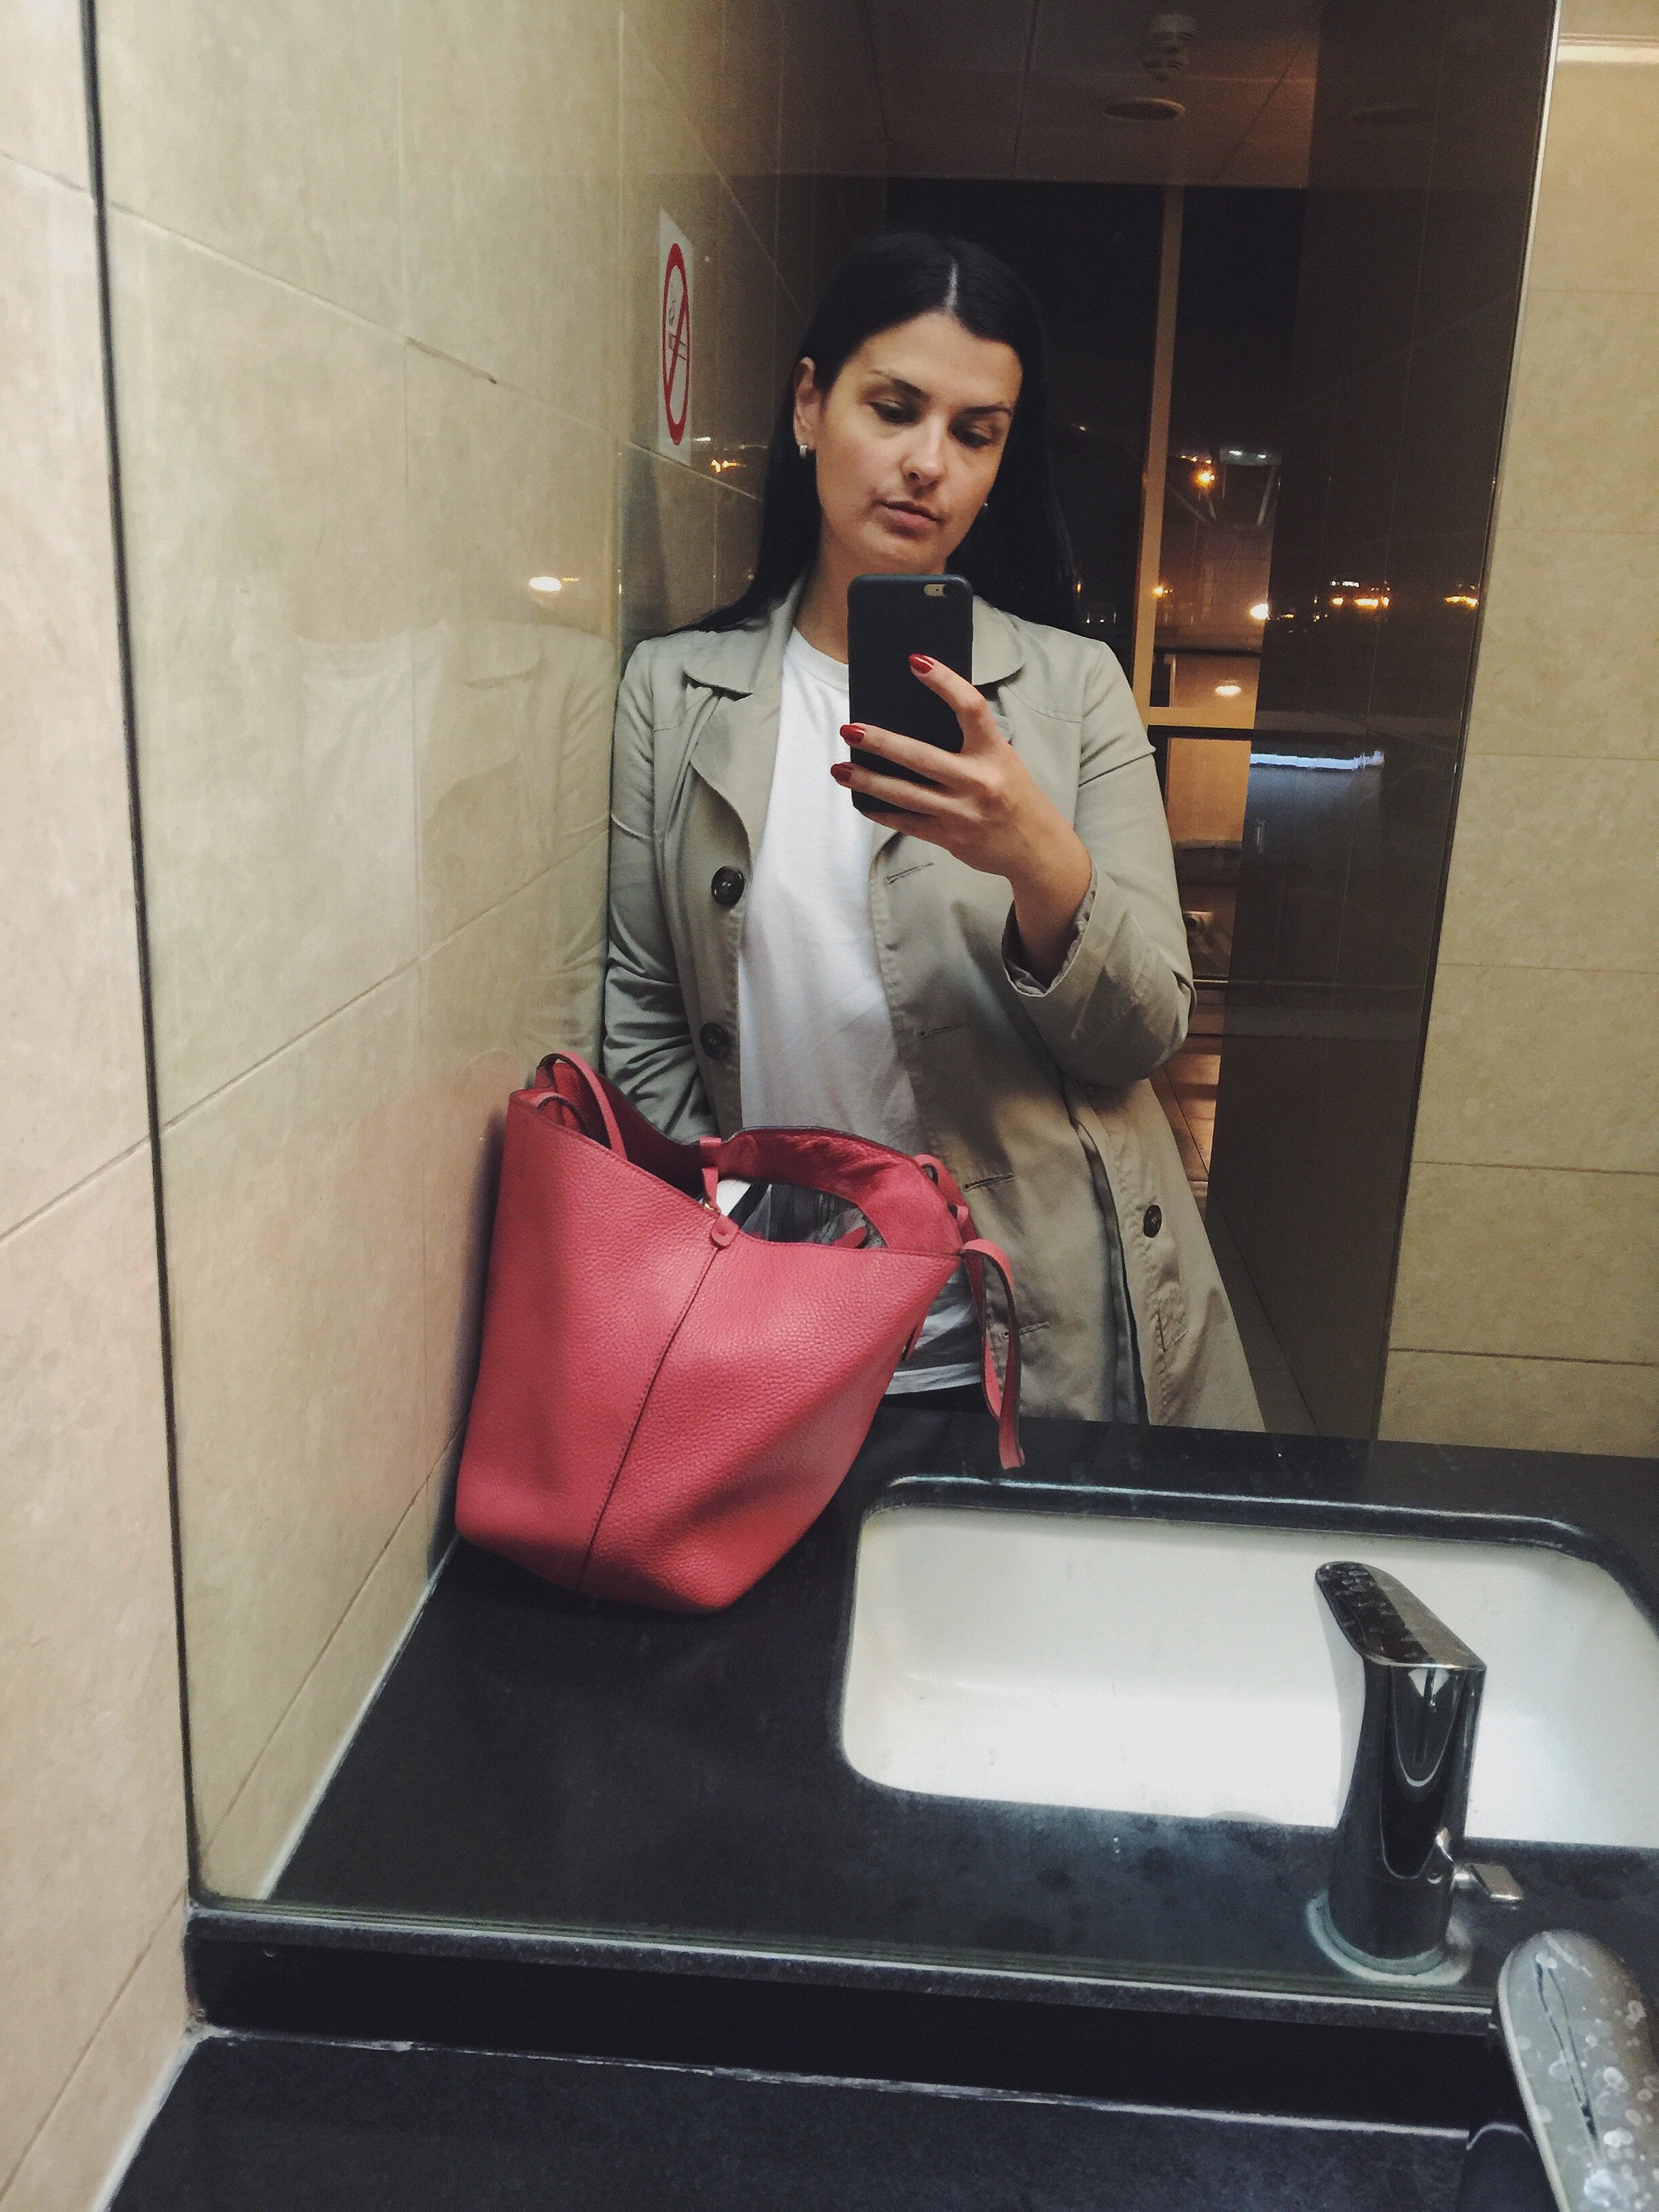 A woman taking a selfie in front of a bathroom window, with her large bag on the sink countertop